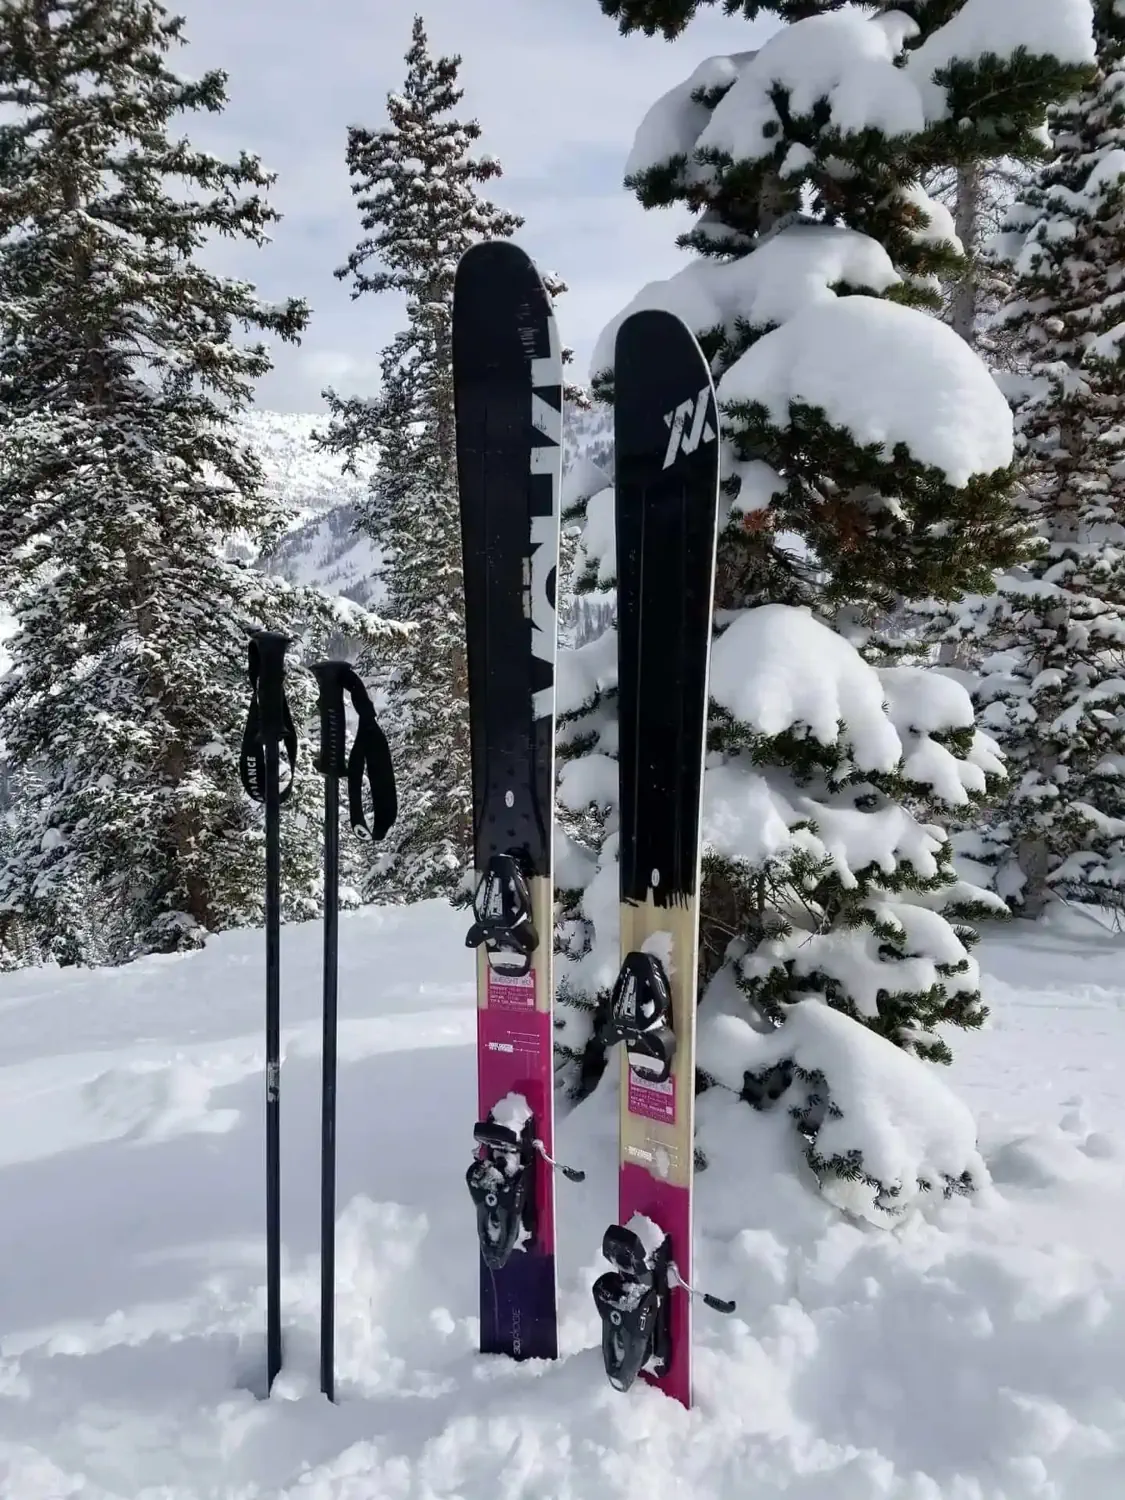 Lindsey's new ski poles and skis standing in the snow